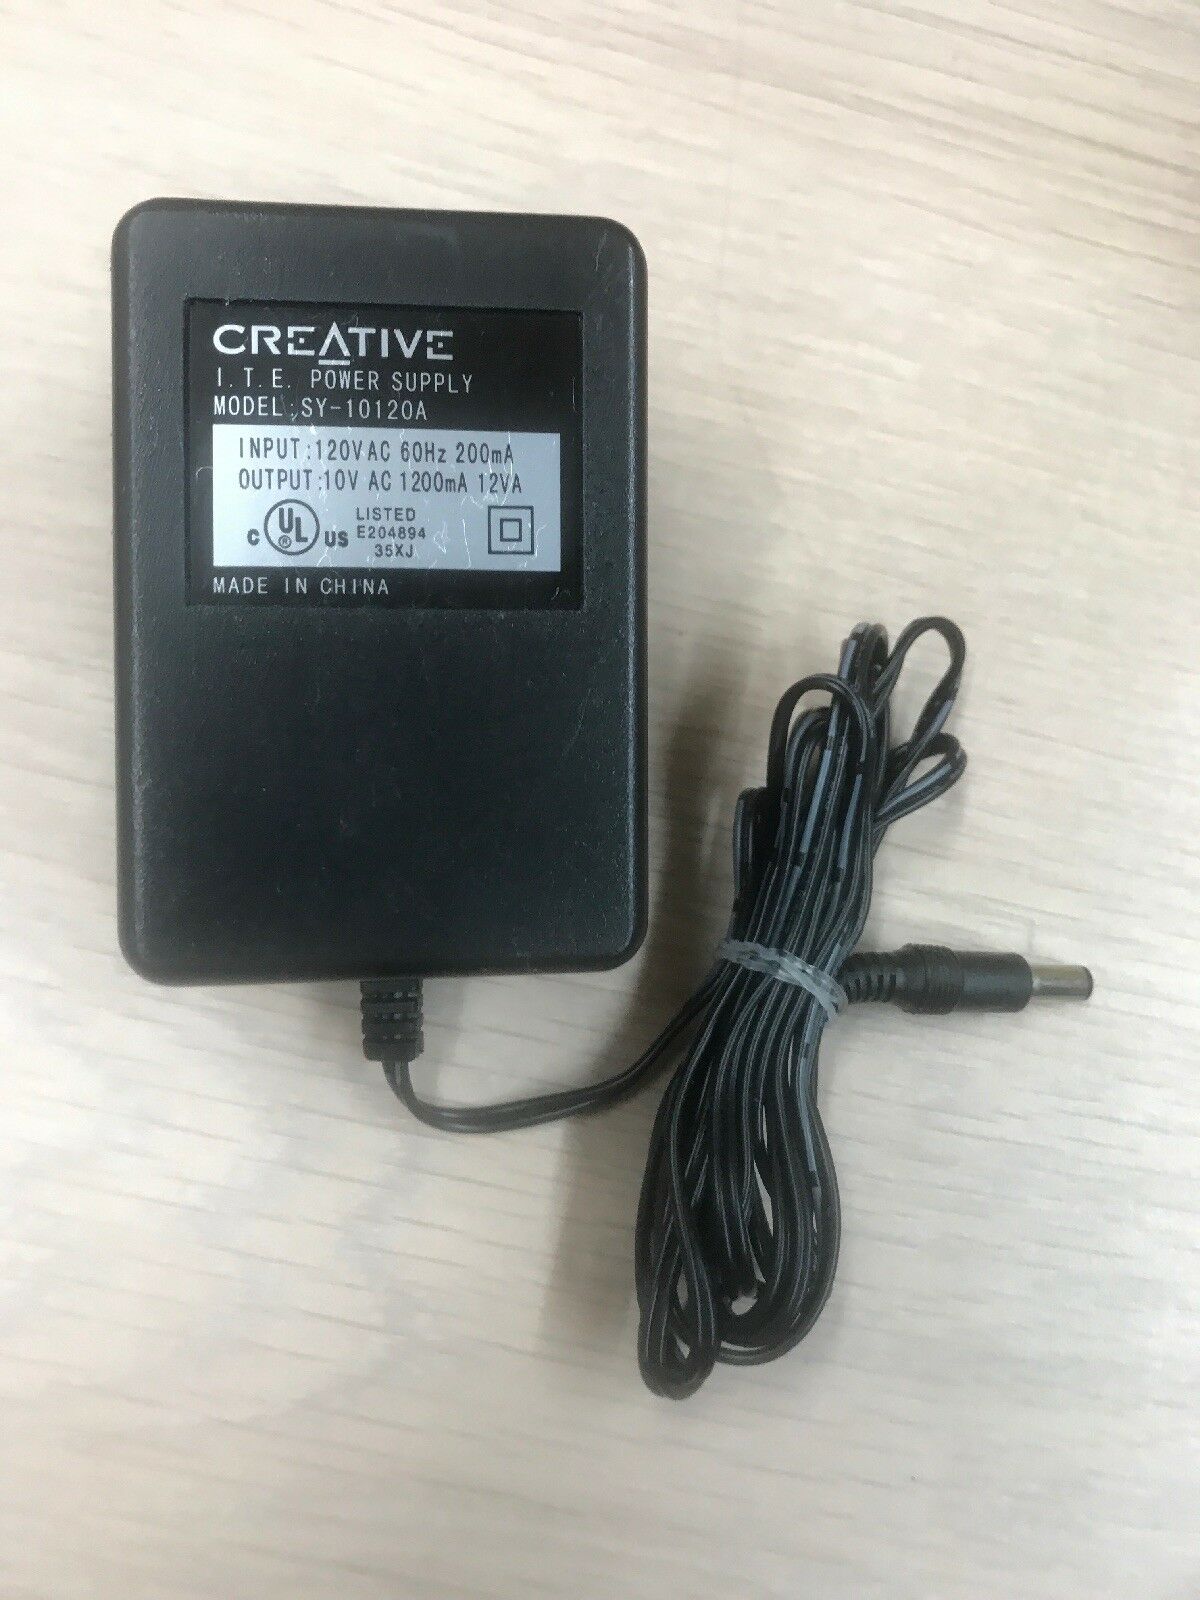 *Brand NEW* 10VAC 1200mA 12VA AC/AC Adapter Creative SY-10120A Power Supply Charger